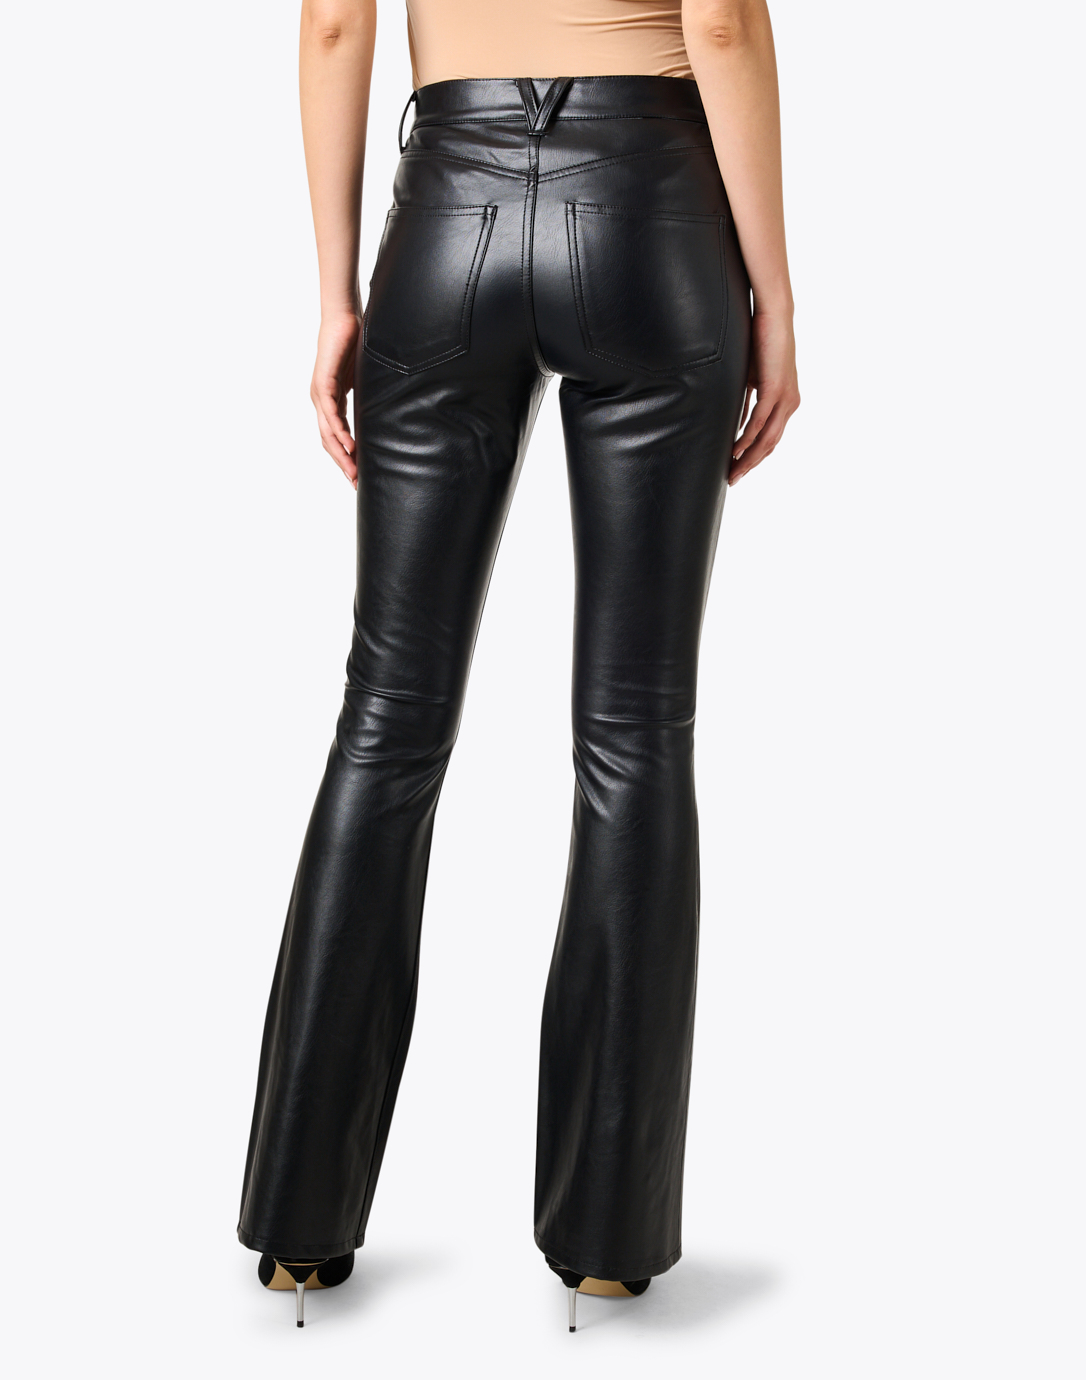 Forever 21 Women's Faux Leather High-Rise Flare Pants in Black, XS